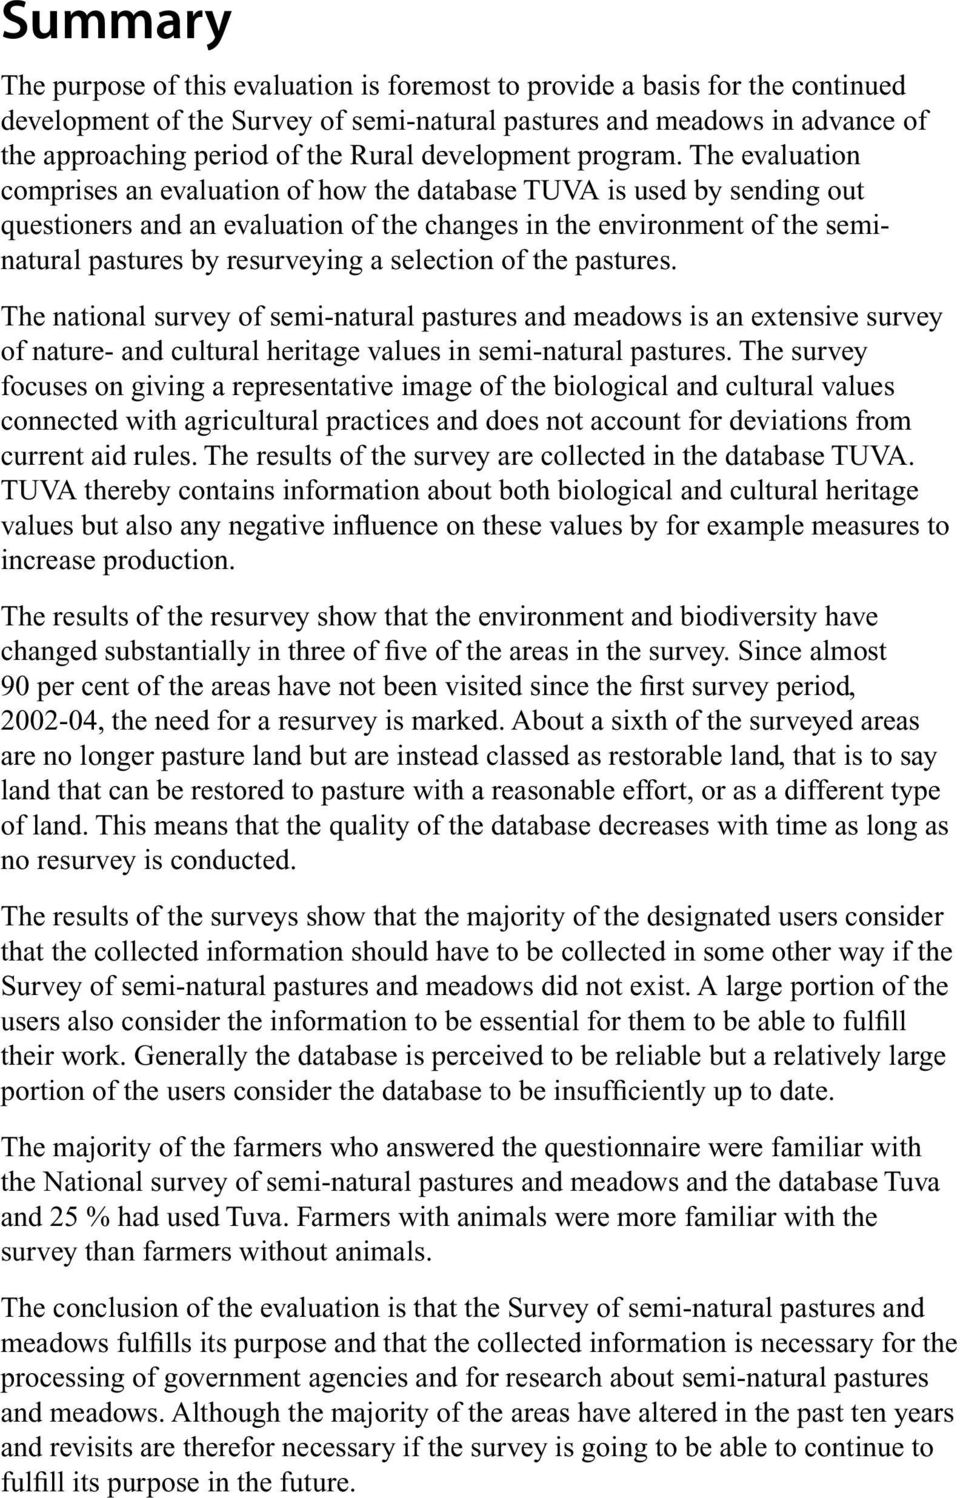 The evaluation comprises an evaluation of how the database TUVA is used by sending out questioners and an evaluation of the changes in the environment of the seminatural pastures by resurveying a